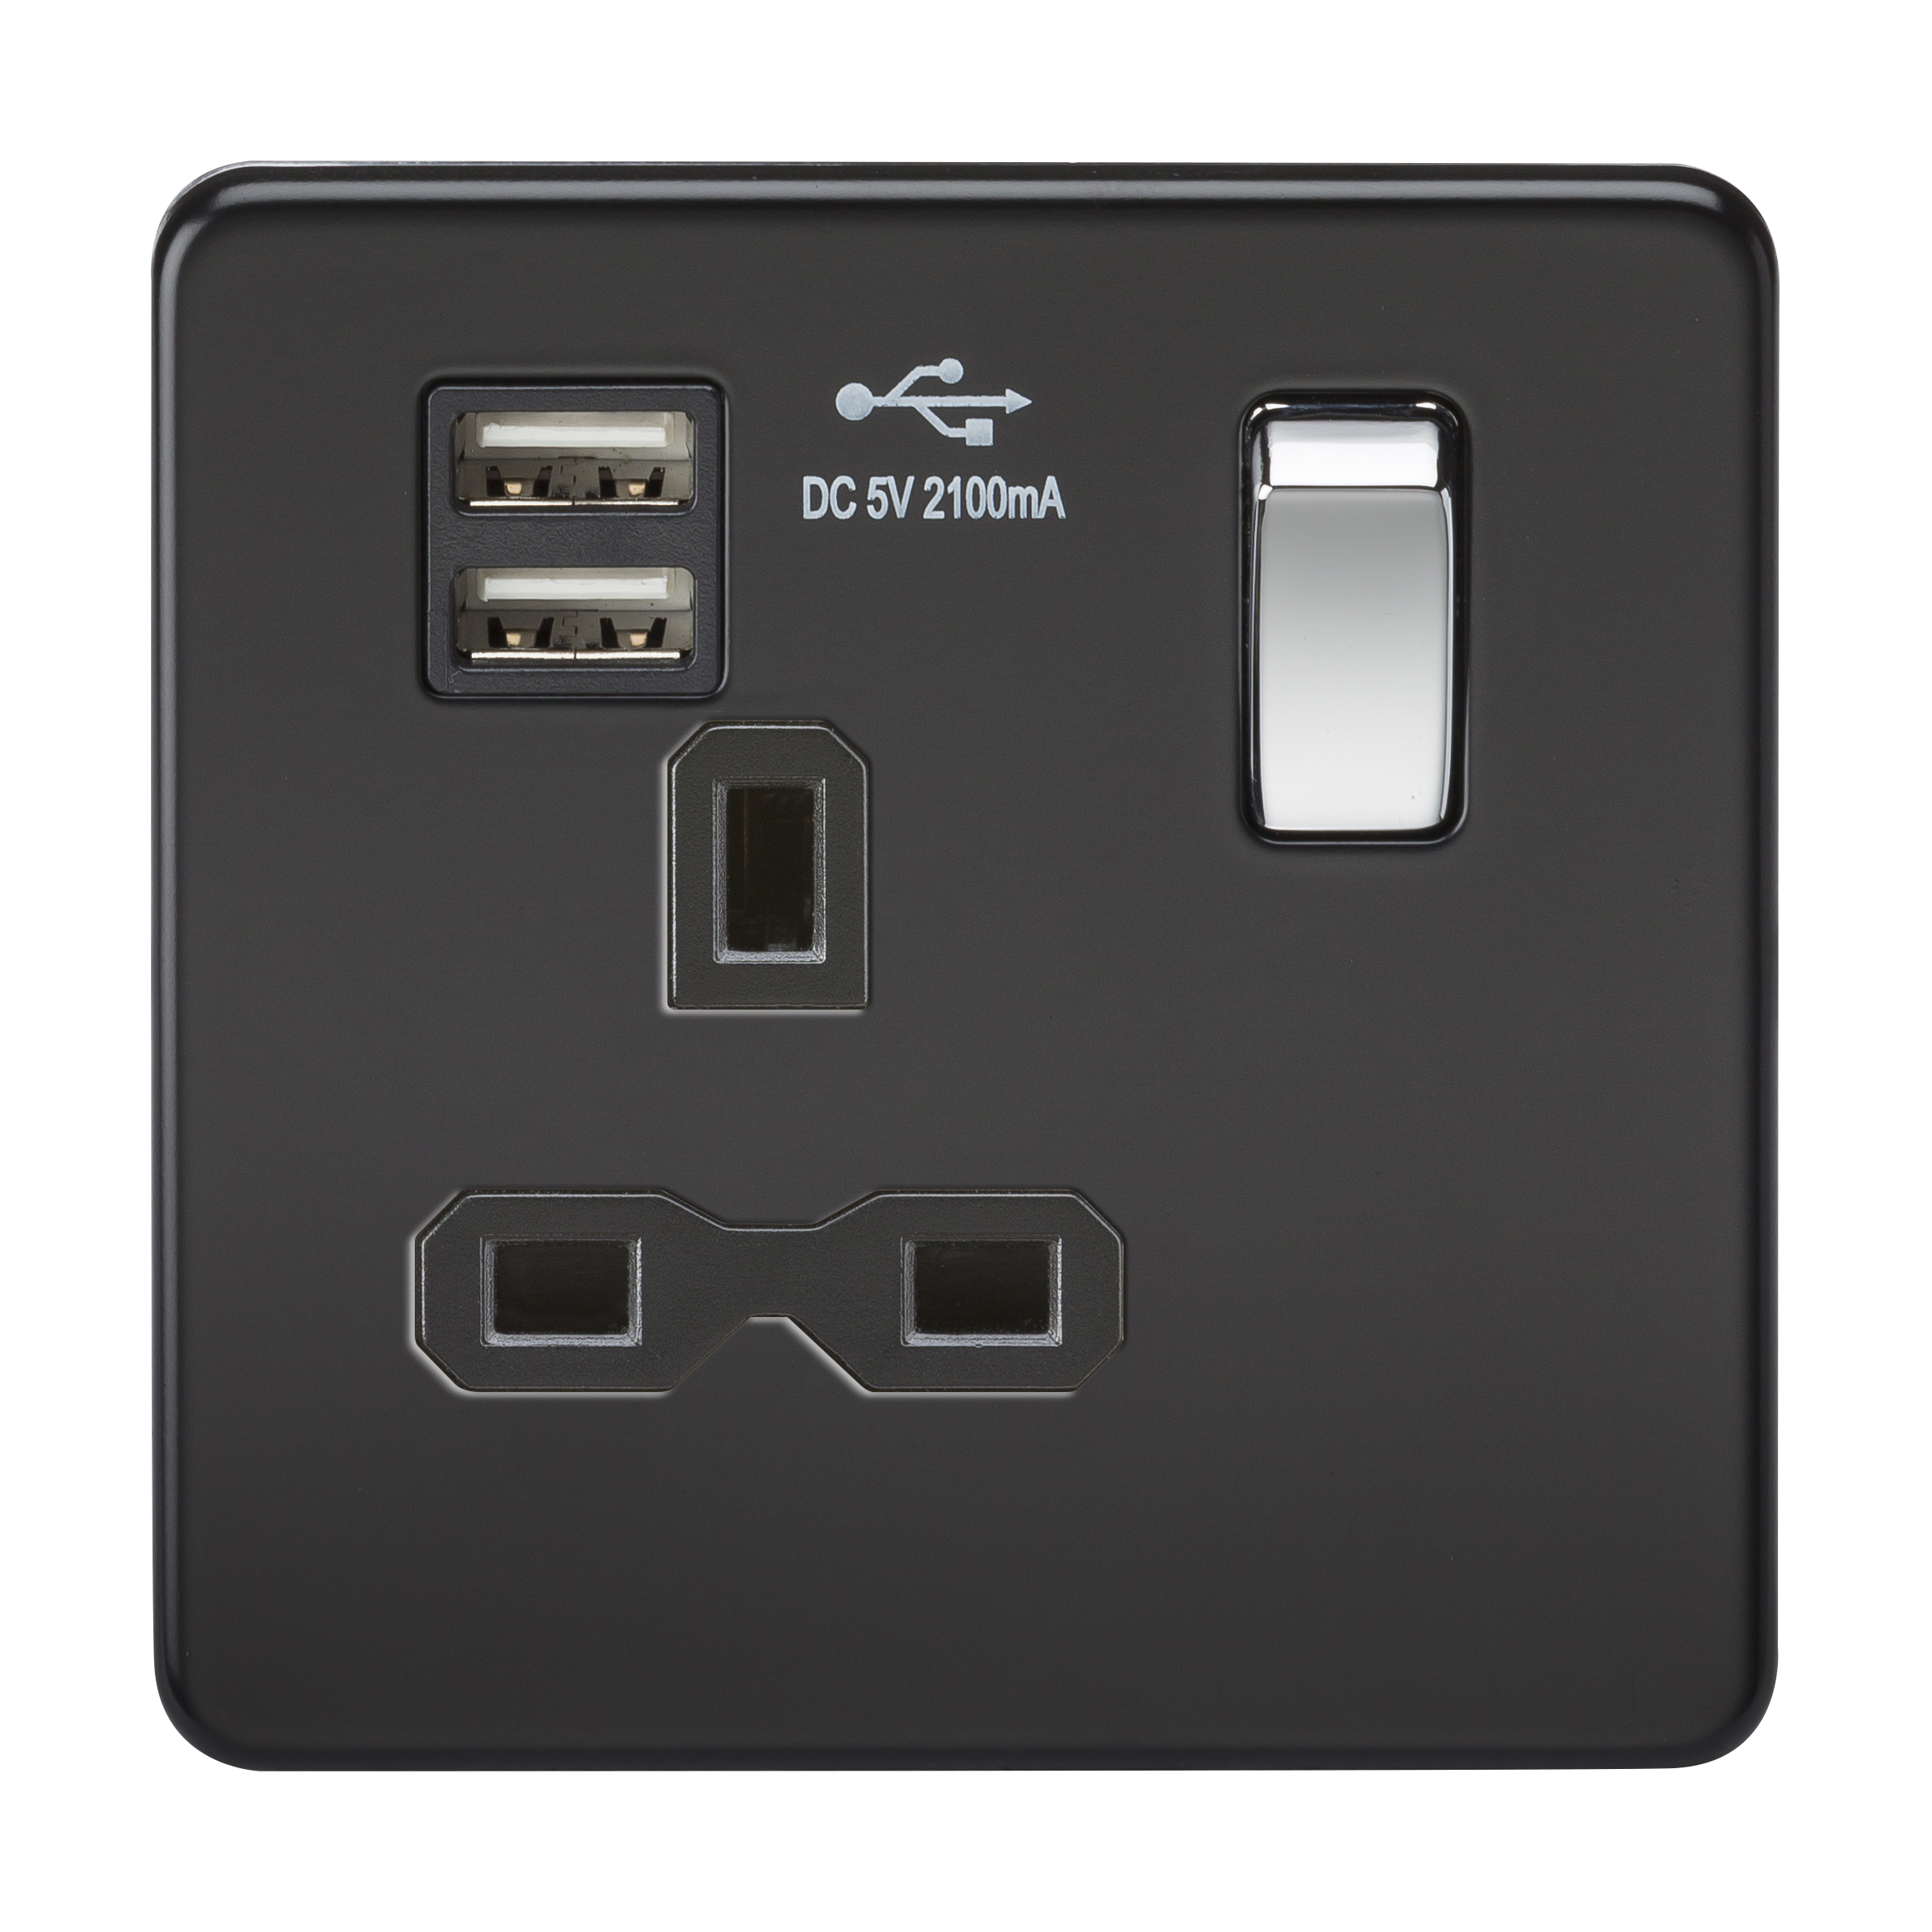 Screwless 13A 1G Switched Socket With Dual USB Charger (2.1A) - Matt Black With Chrome Rocker - SFR9901MB 